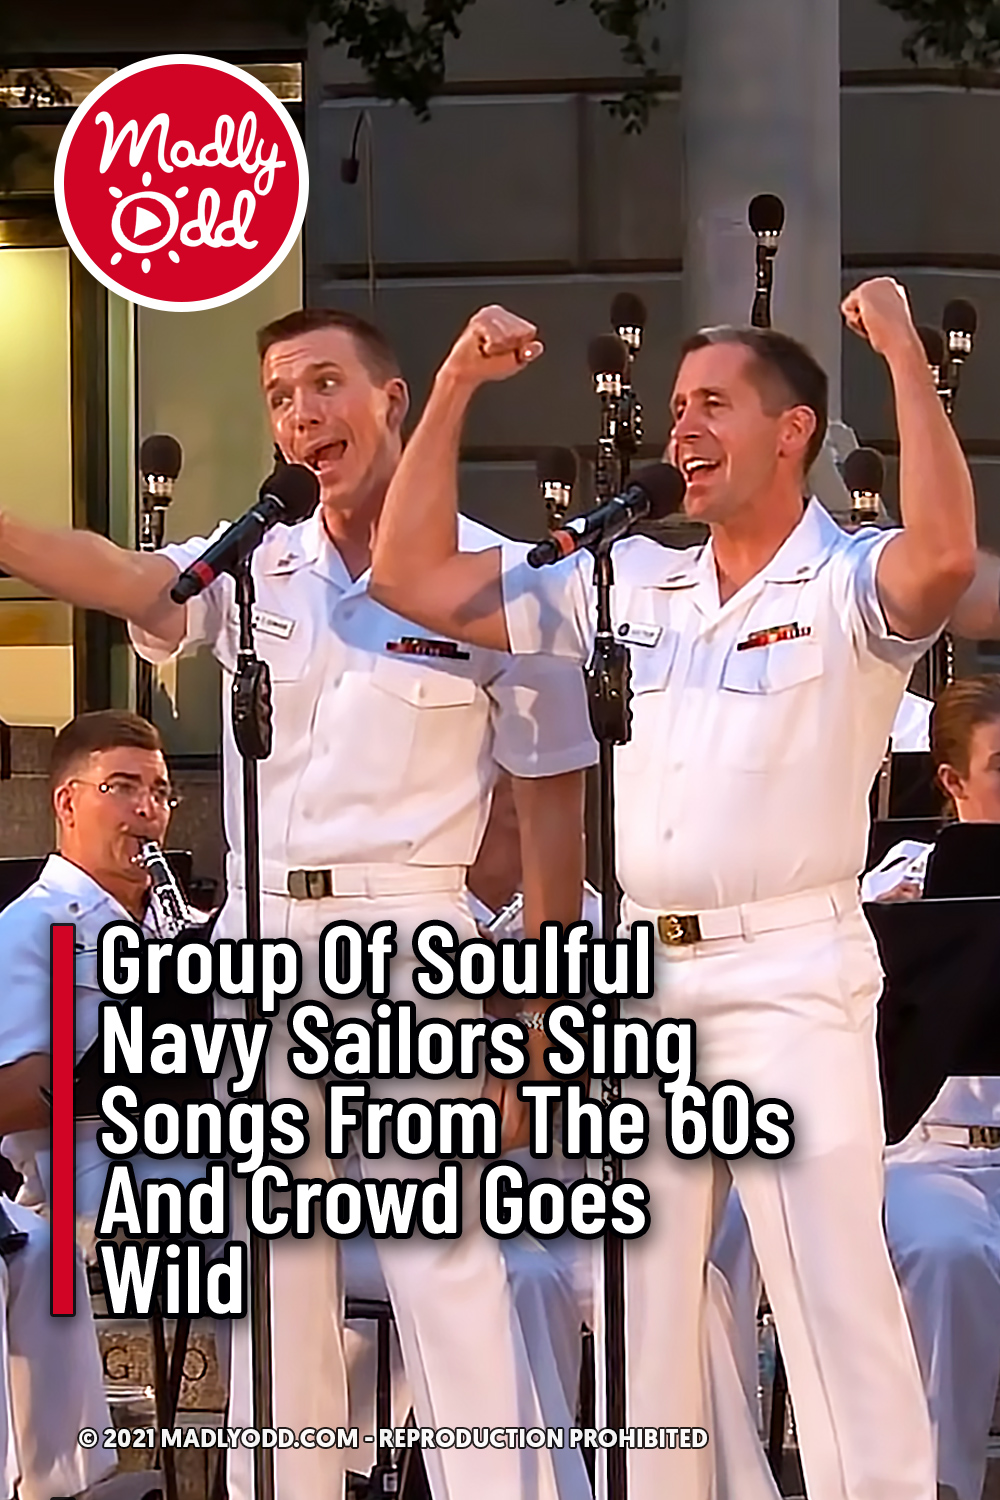 Group Of Soulful Navy Sailors Sing Songs From The 60s And Crowd Goes Wild